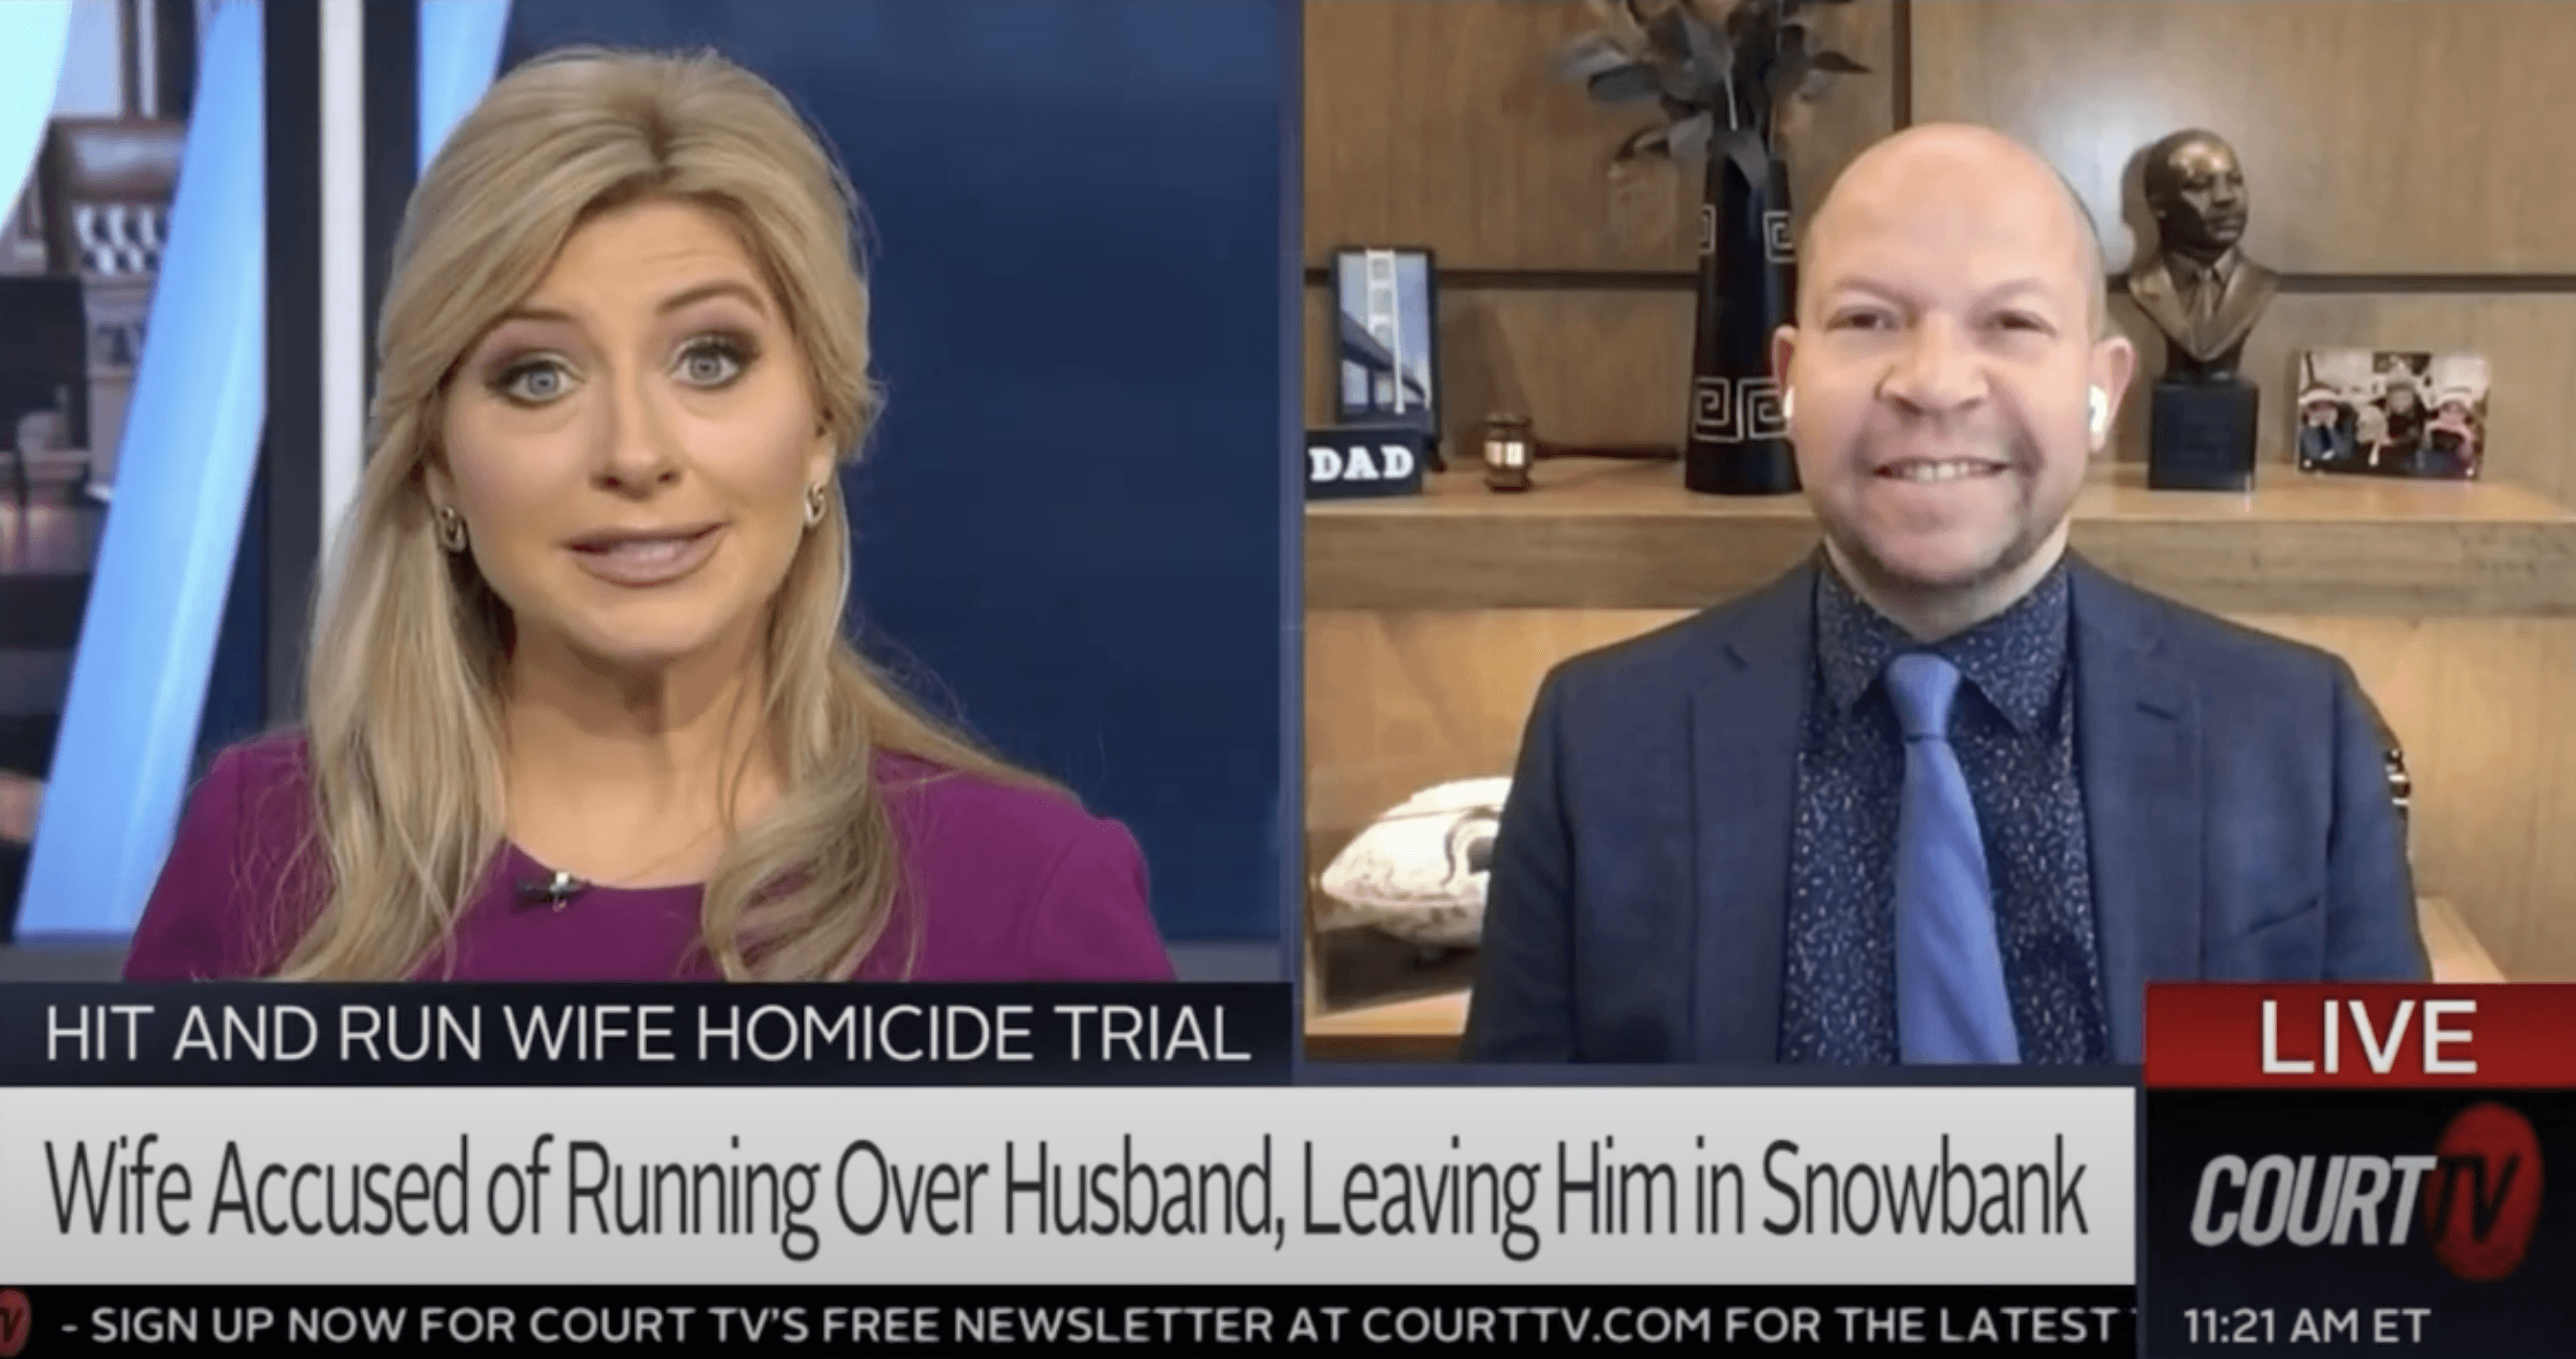 Court TV | Attorney Jamie White discusses the charge in the ‘hit-and-run wife homicide’ trial